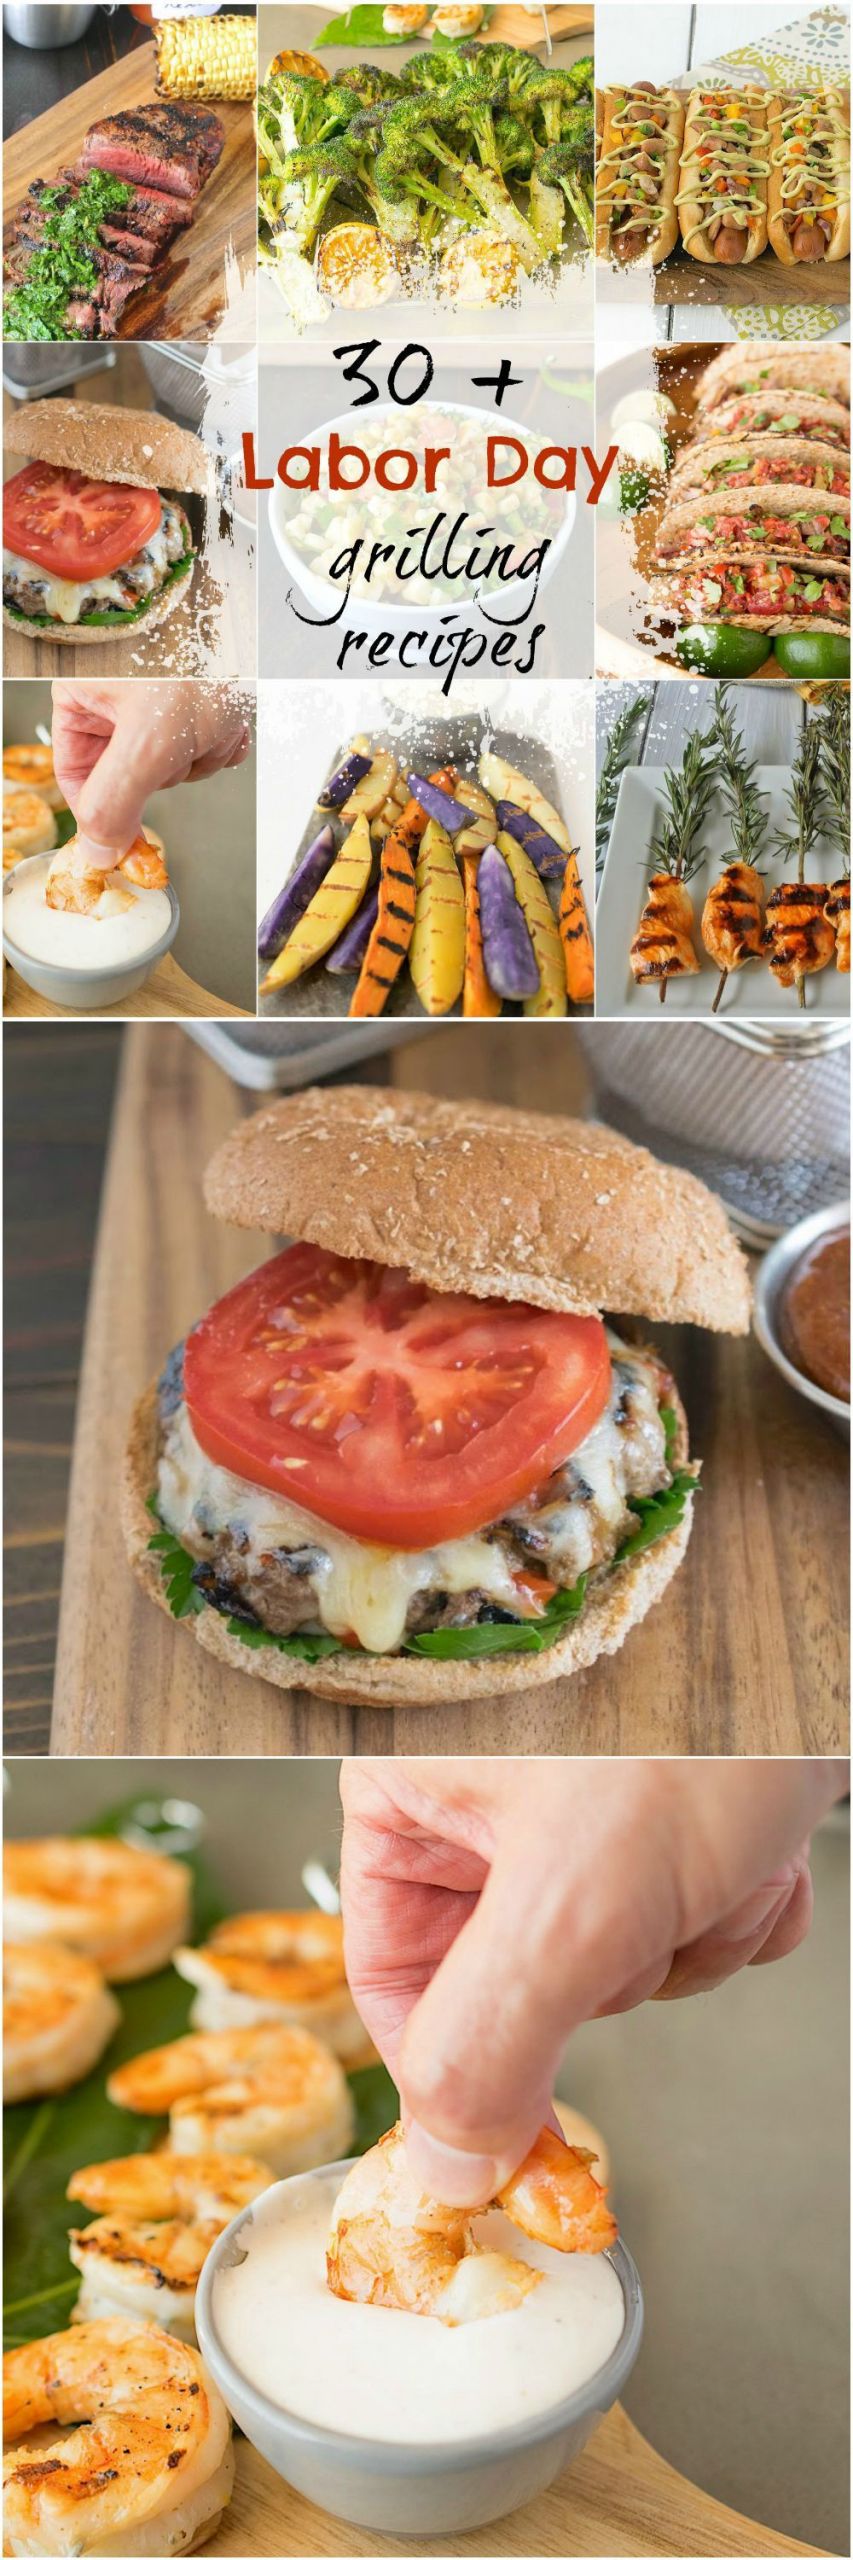 Labor Day Dinner Ideas
 30 Labor Day grilling recipes to help you with your